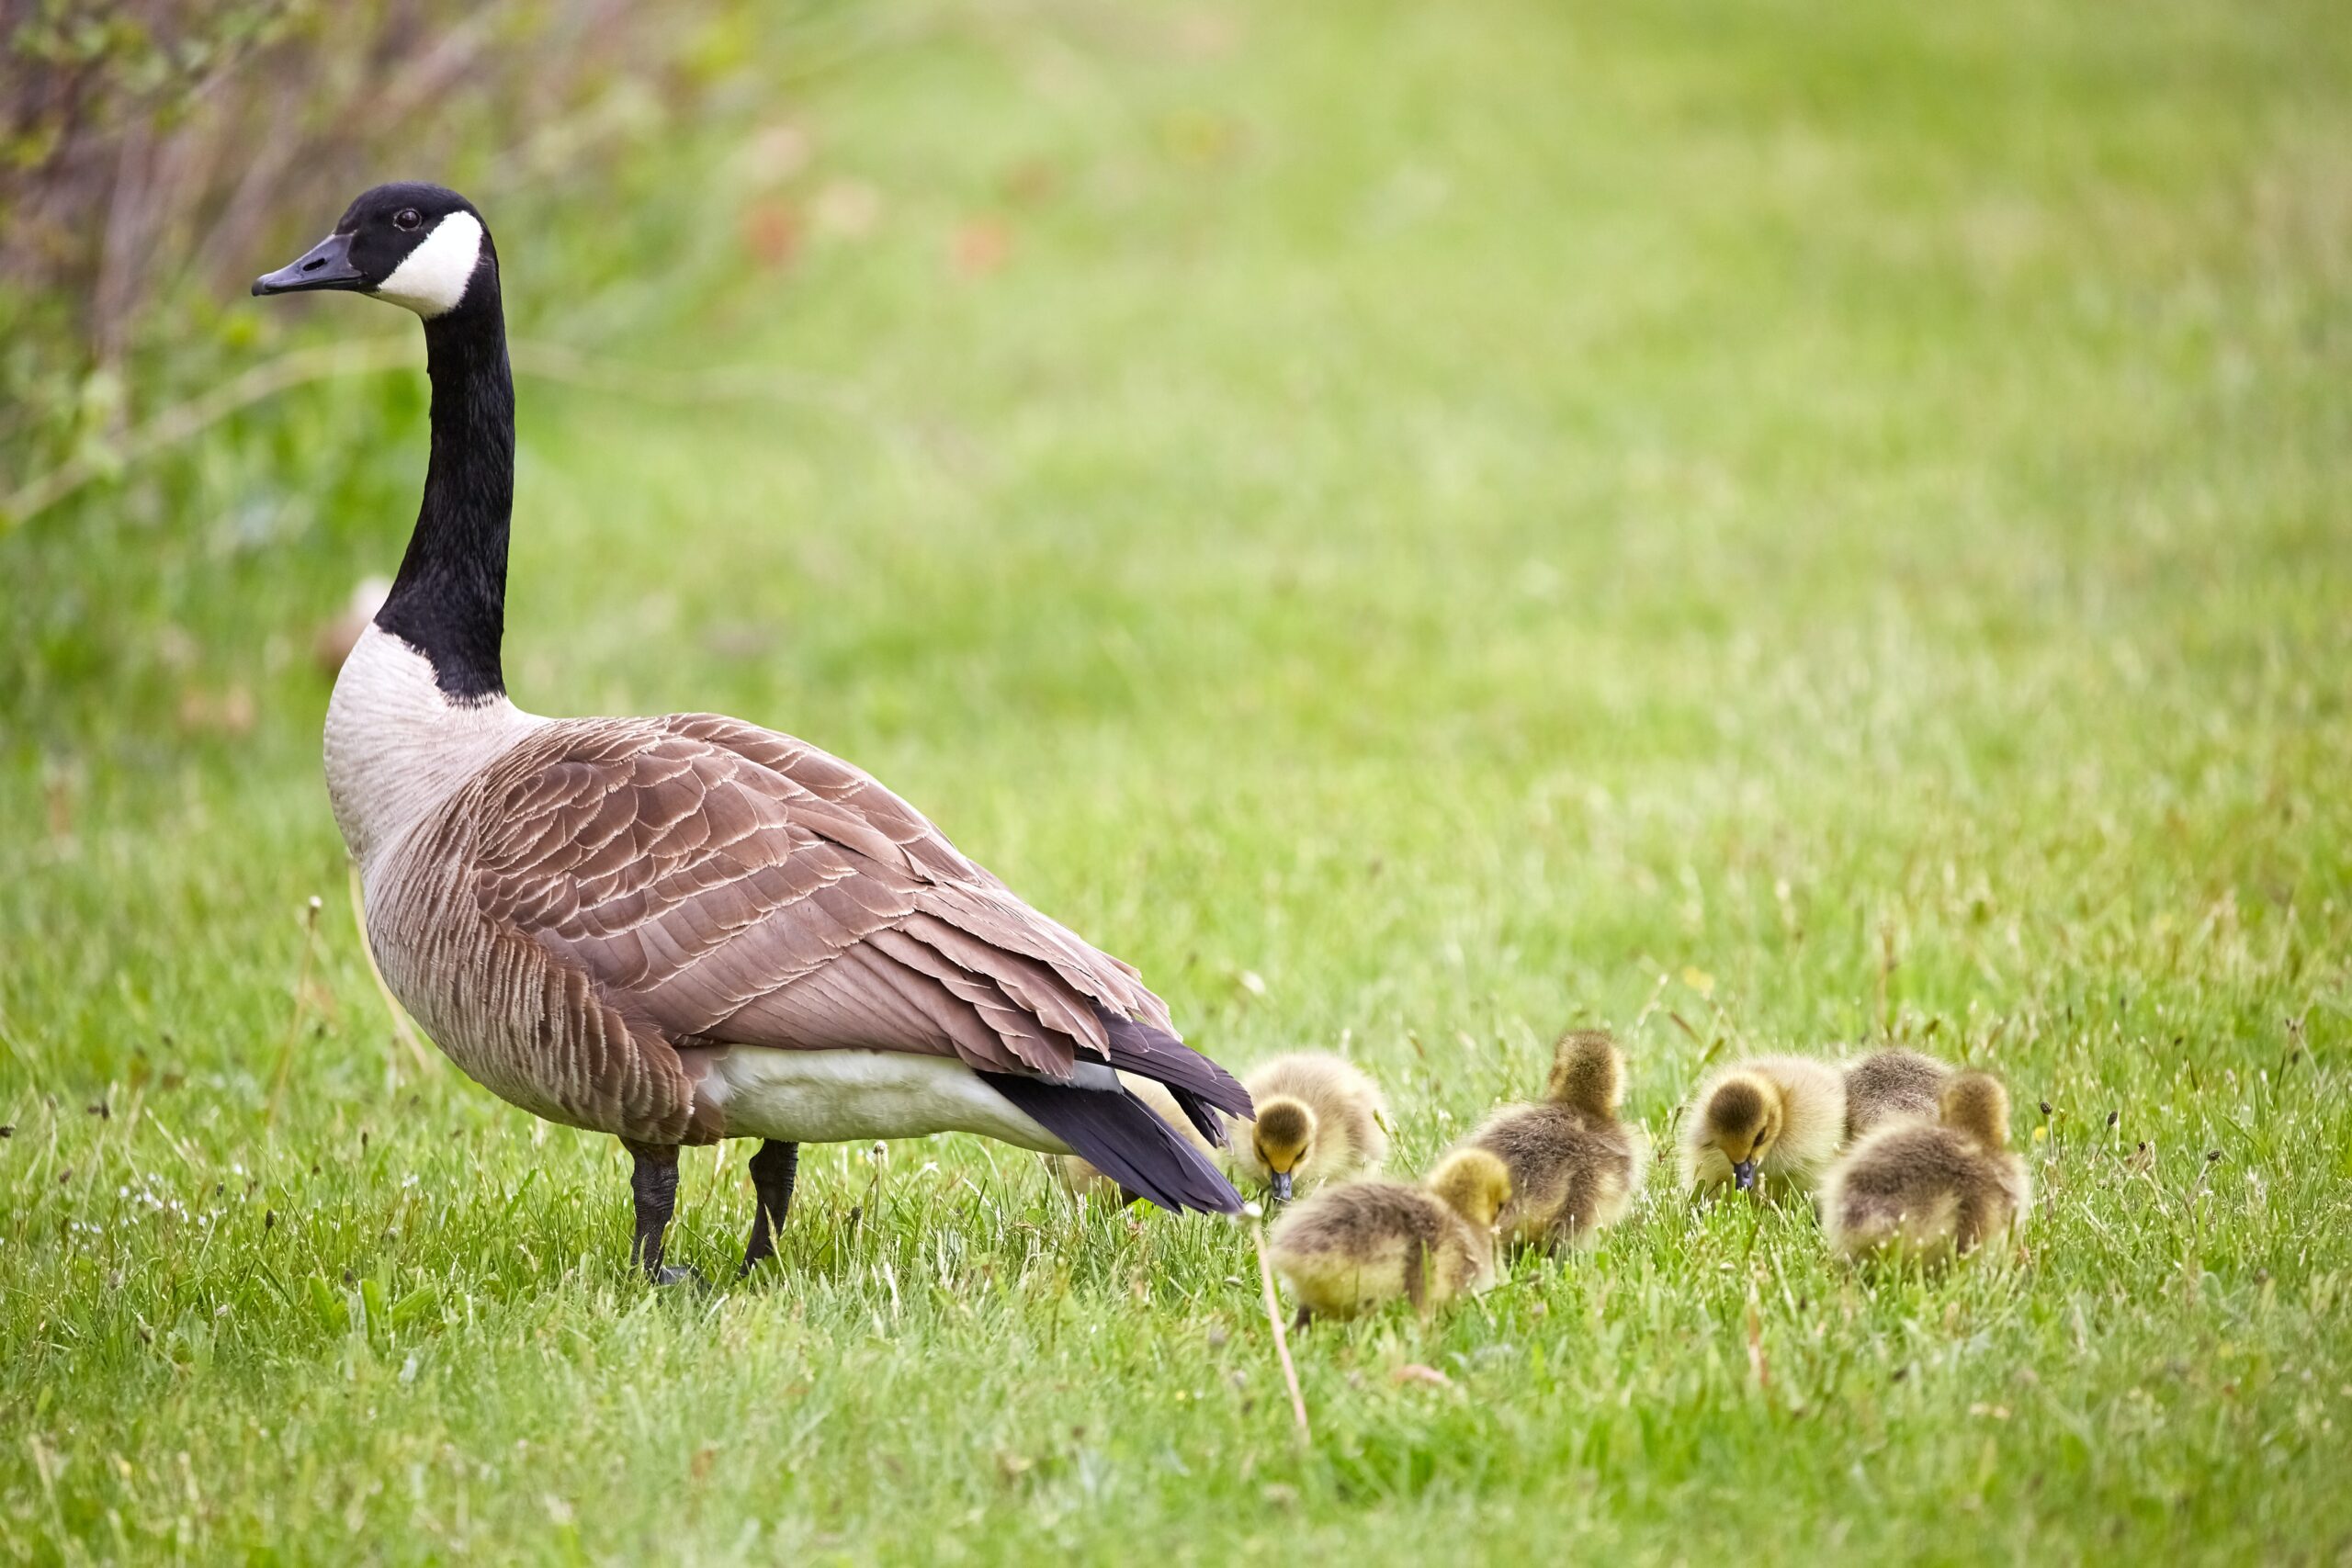 A flock of geese were 'deliberately' run over by a white van in Salford.